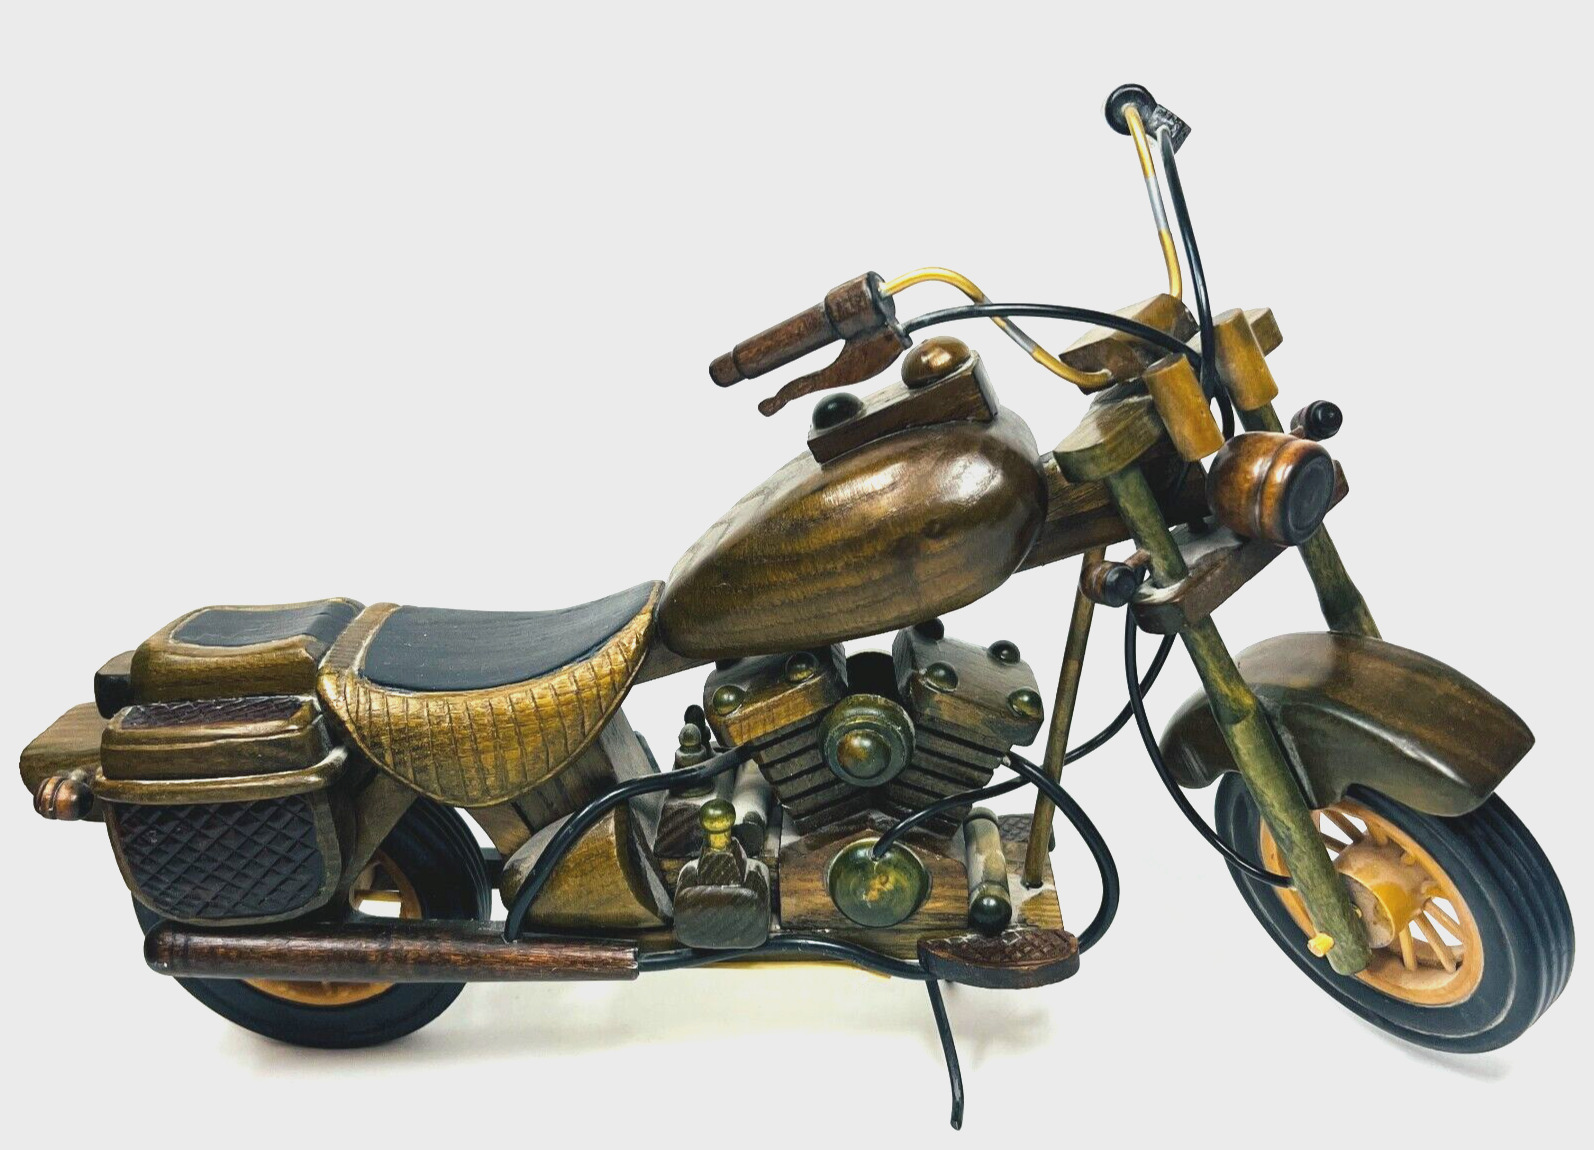 Motorcycle Vintage Classic Wood Model  Decorative Details Hand Assembled 14 inch